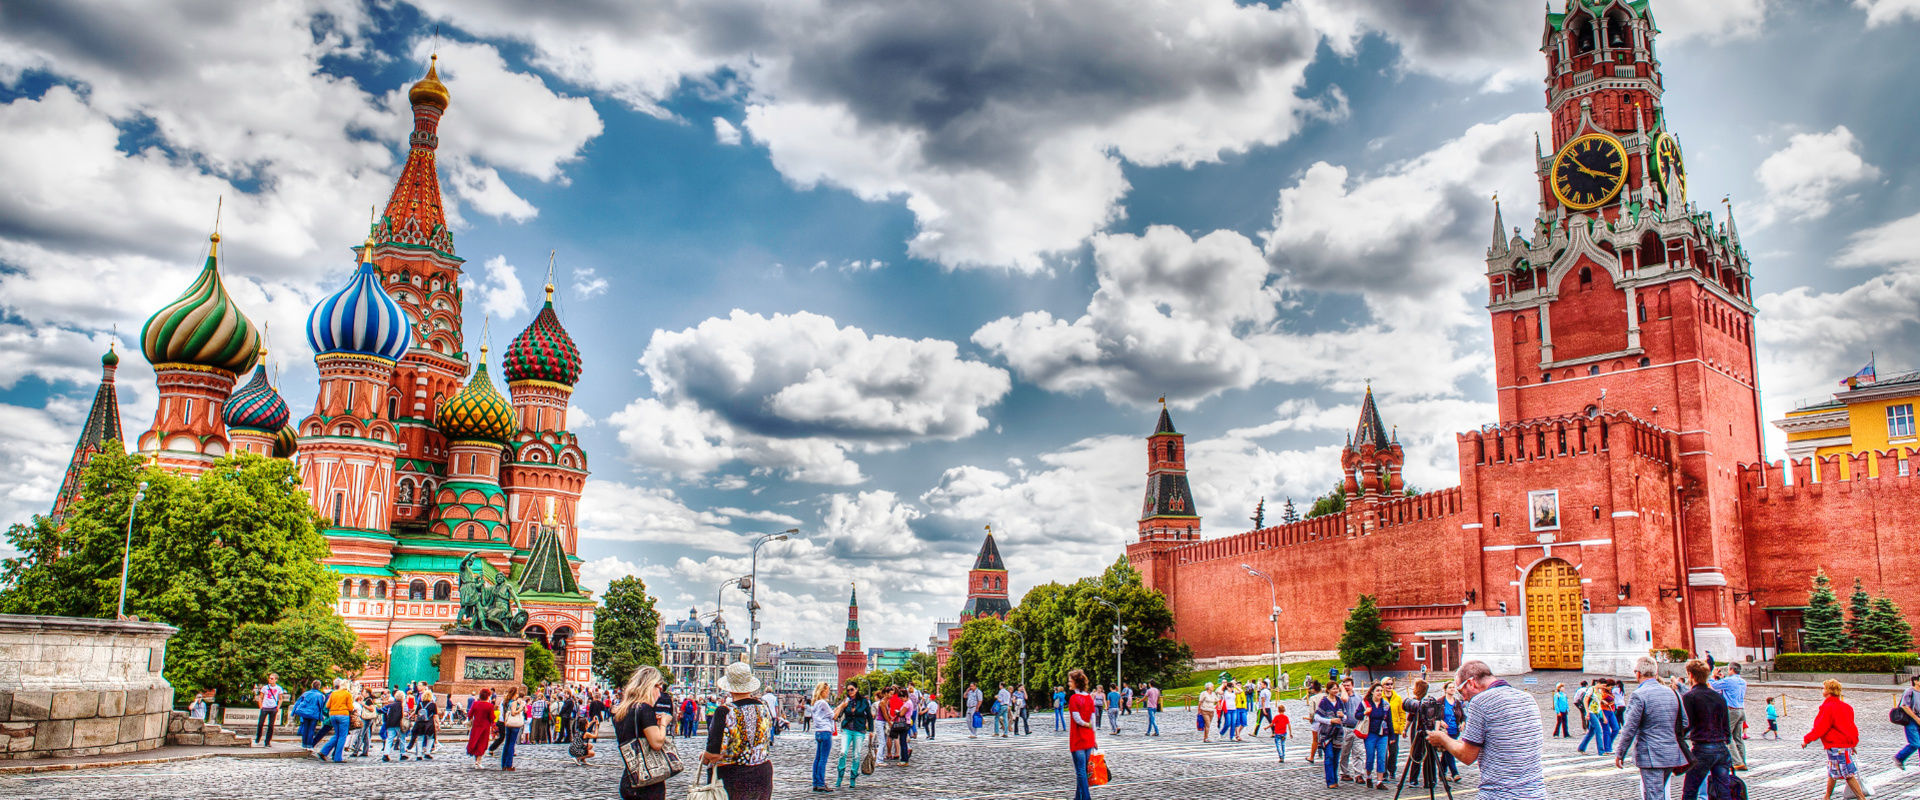 wide_fullhd_Red_square_Moscow_cityscape__8309148721_